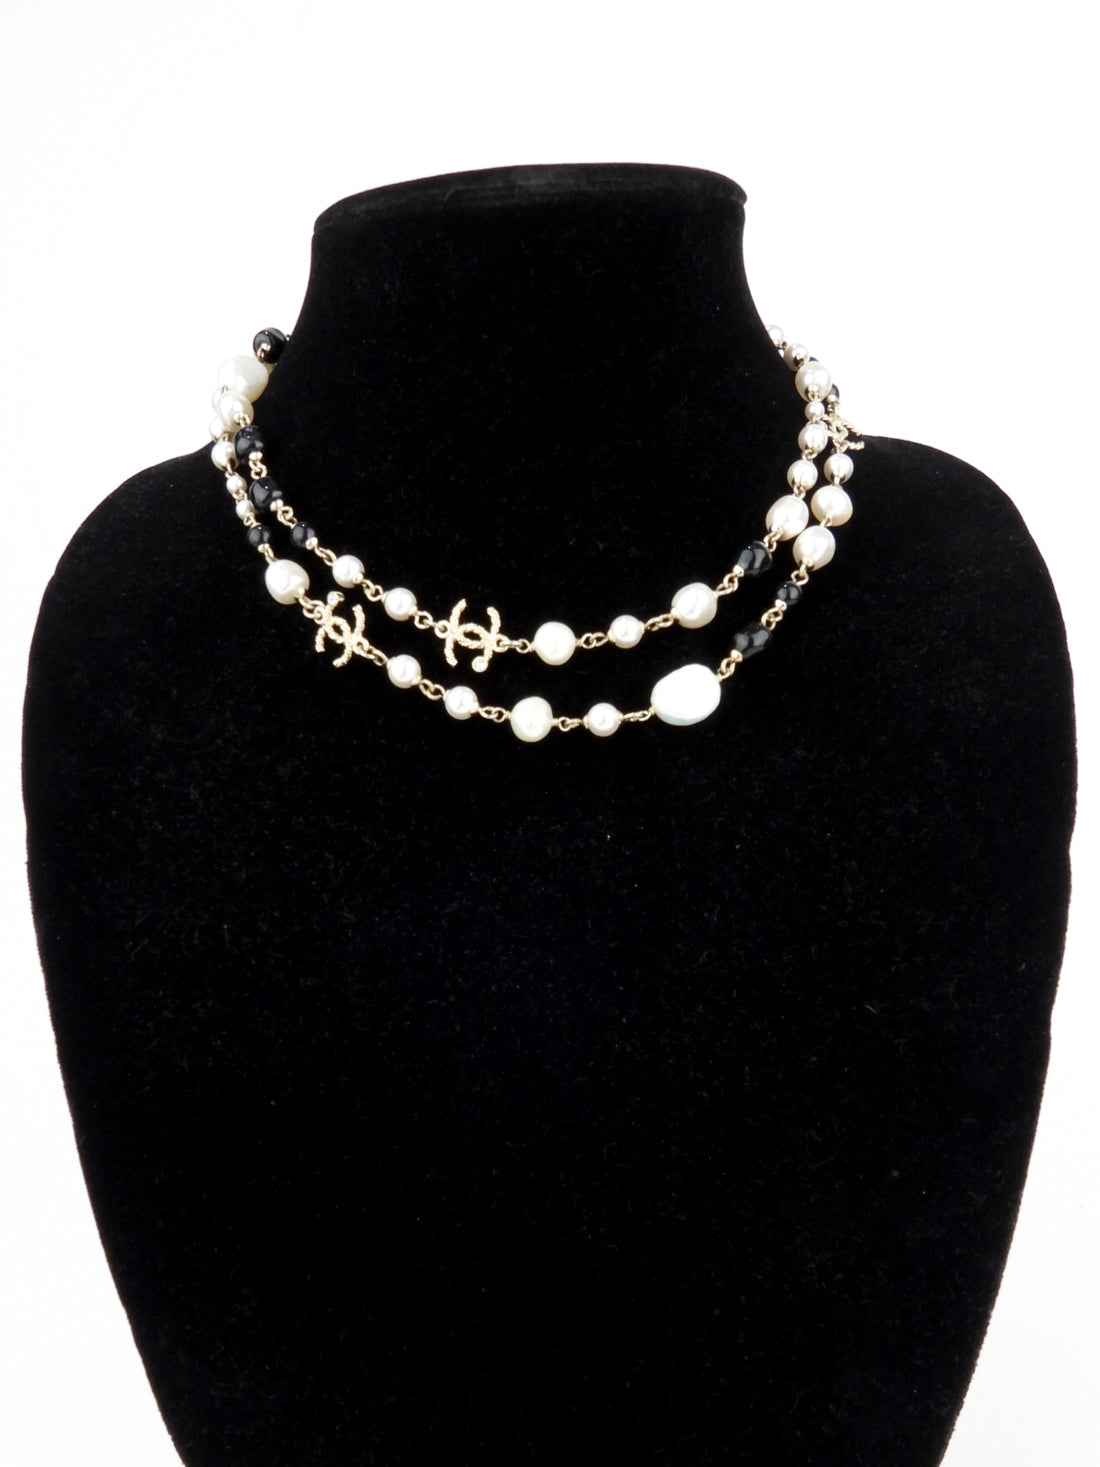 Chanel 19B Pearl, Black, Crystal and Gold Tone CC Long Chain Necklace